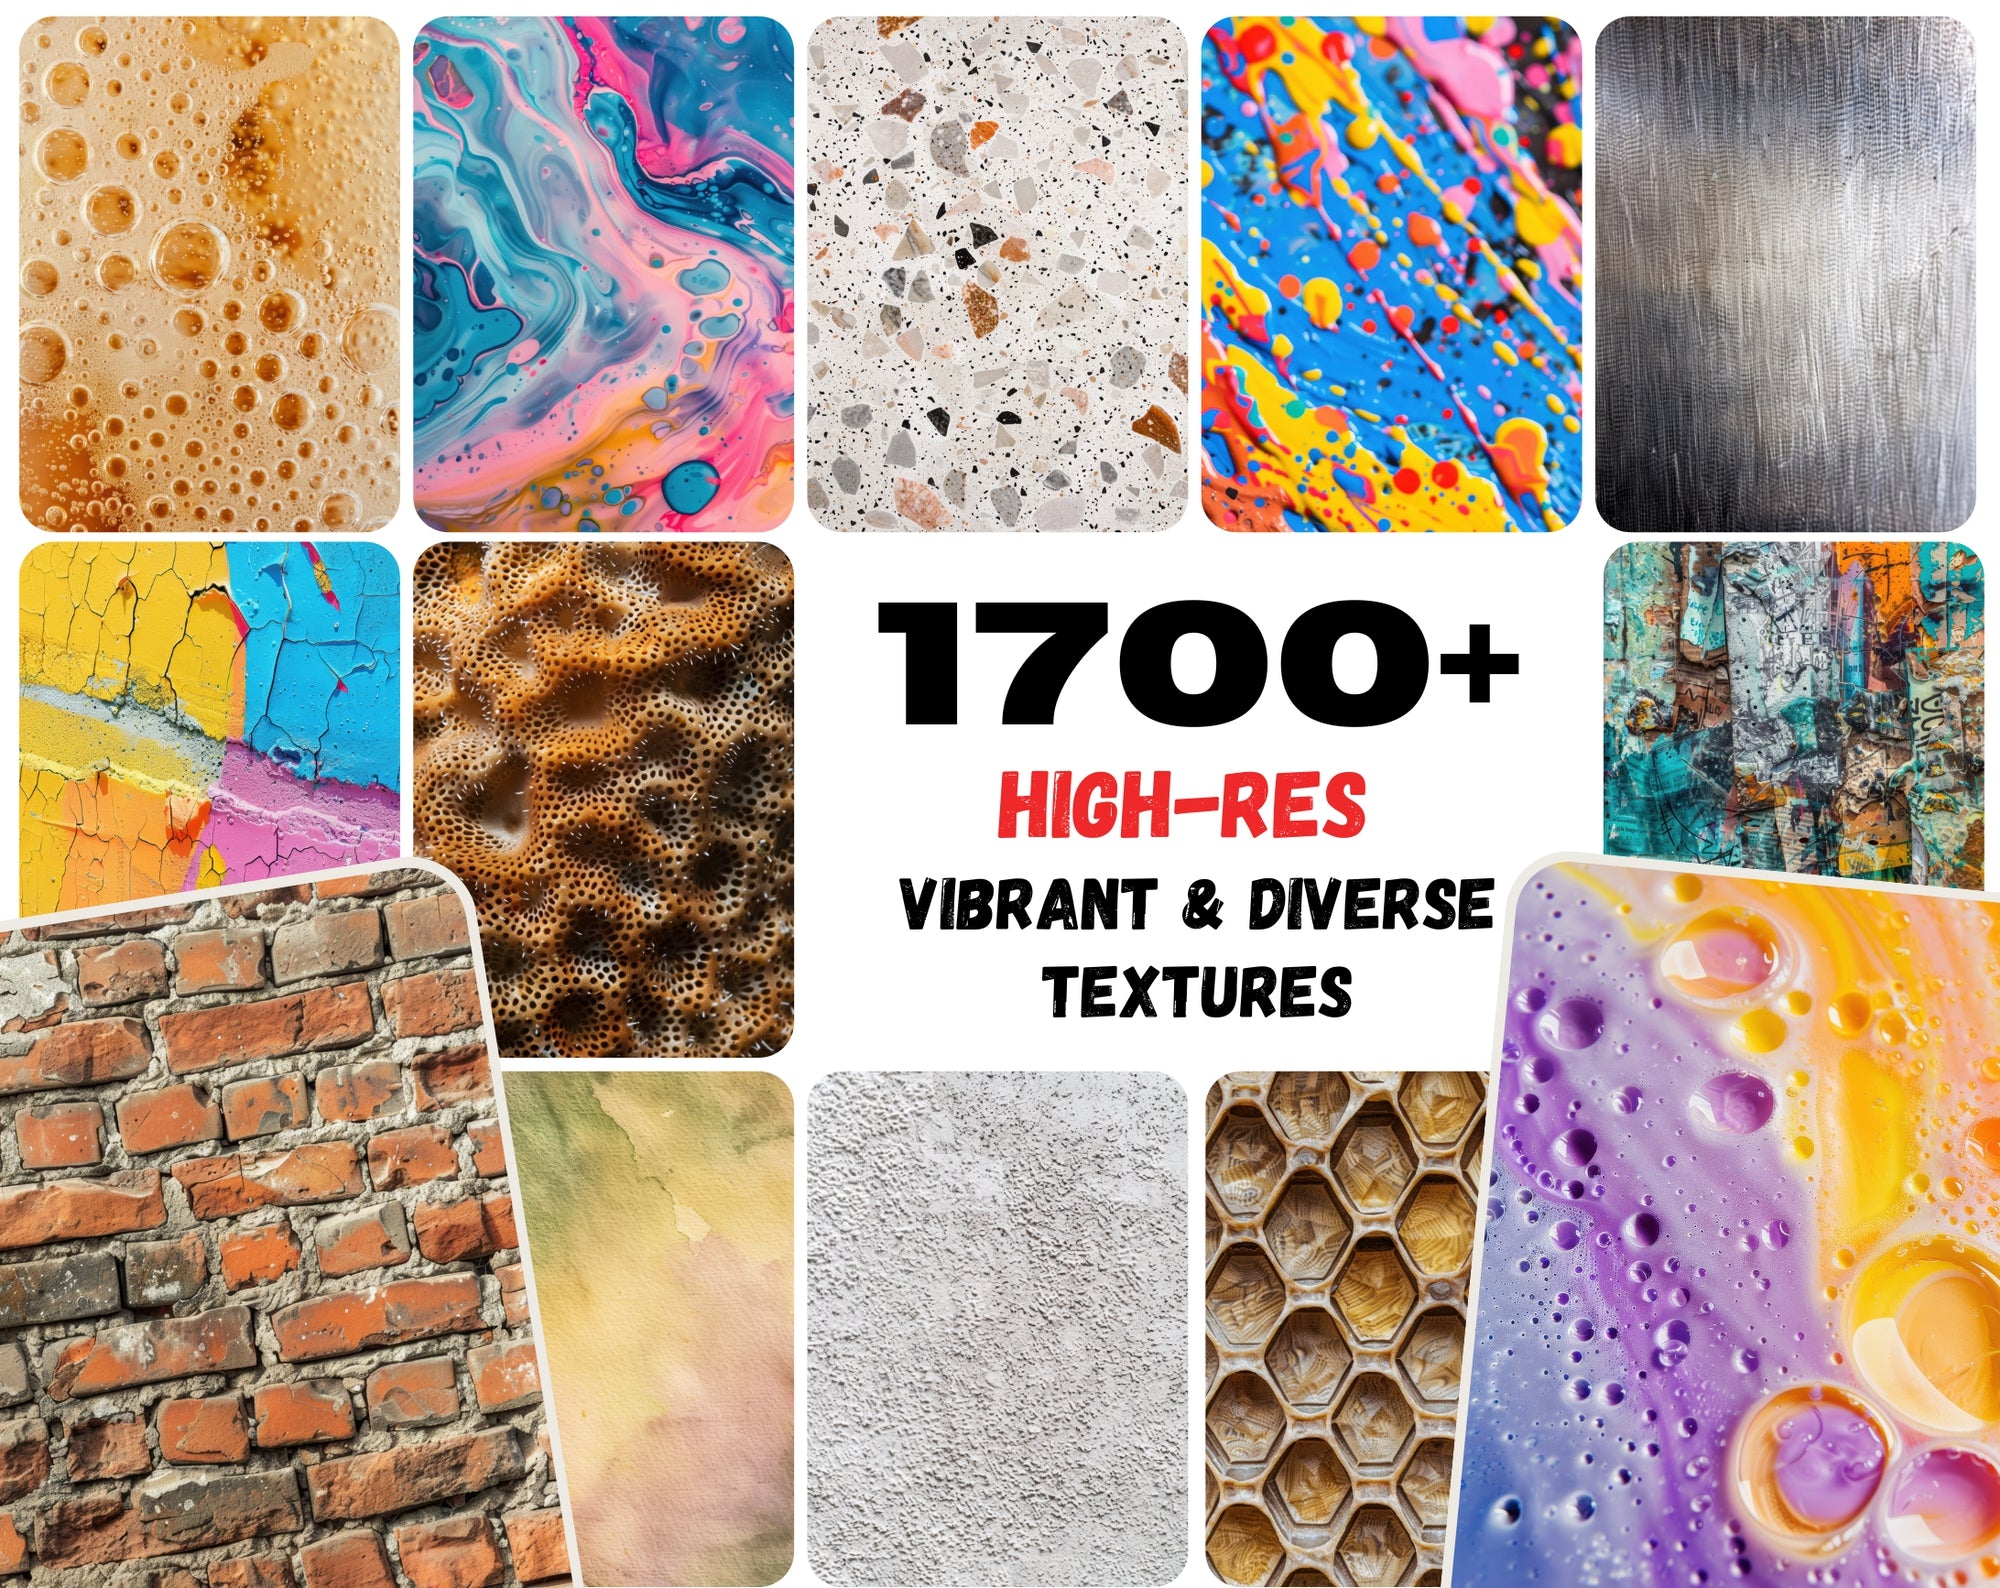 1700+ High-Resolution Texture JPG Images | Plaster, Urban, Fabric, Organic, Abstract & More | Commercial License